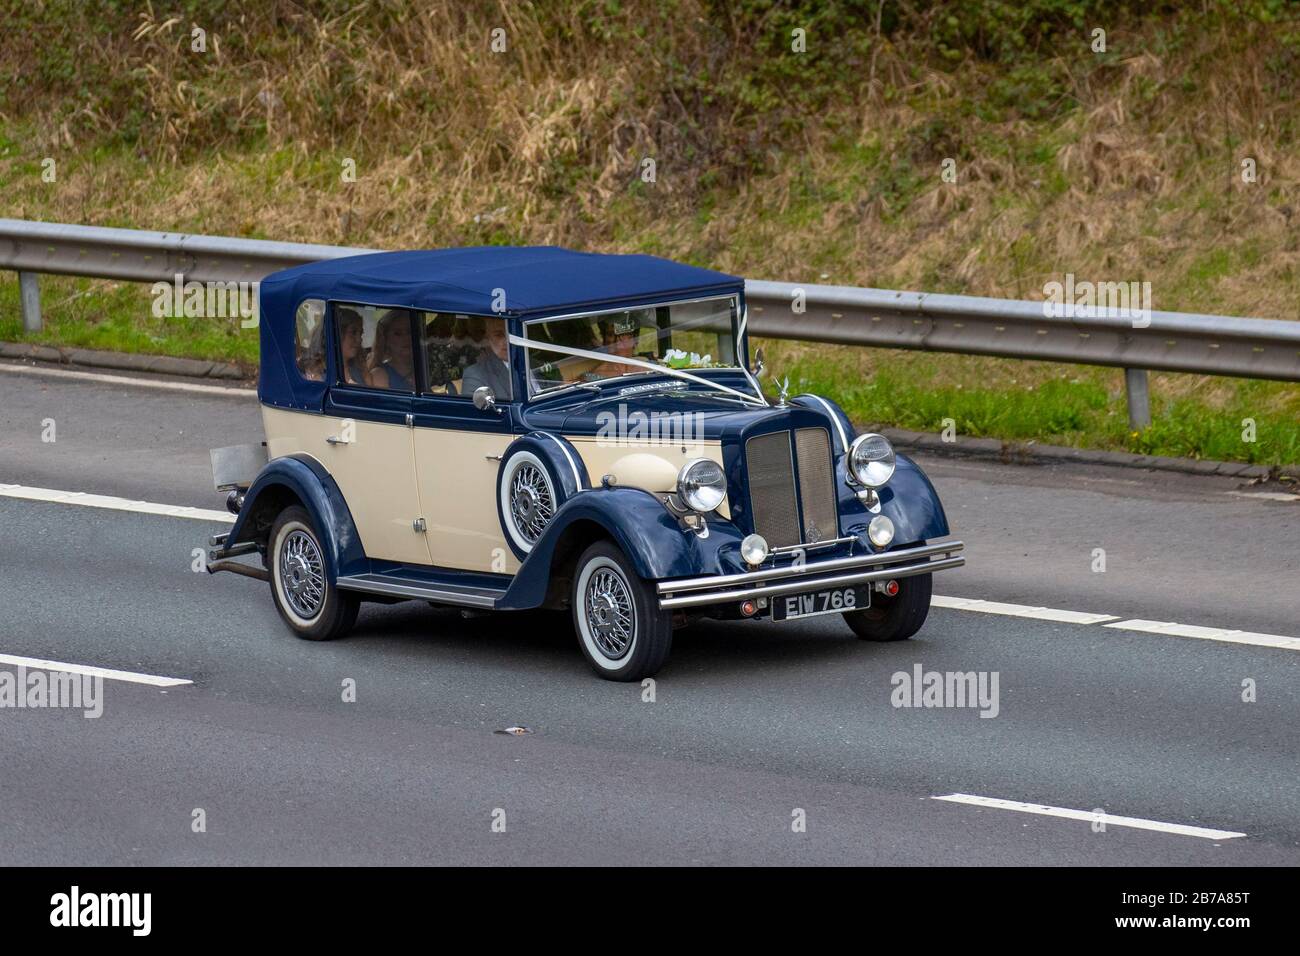 1990 90s blue cream Carbodies Taxi Hire CAR; Vehicular traffic, transport, modern vehicles, saloon cars, vehicle on UK roads, motors, motoring on the M6 motorway Stock Photo